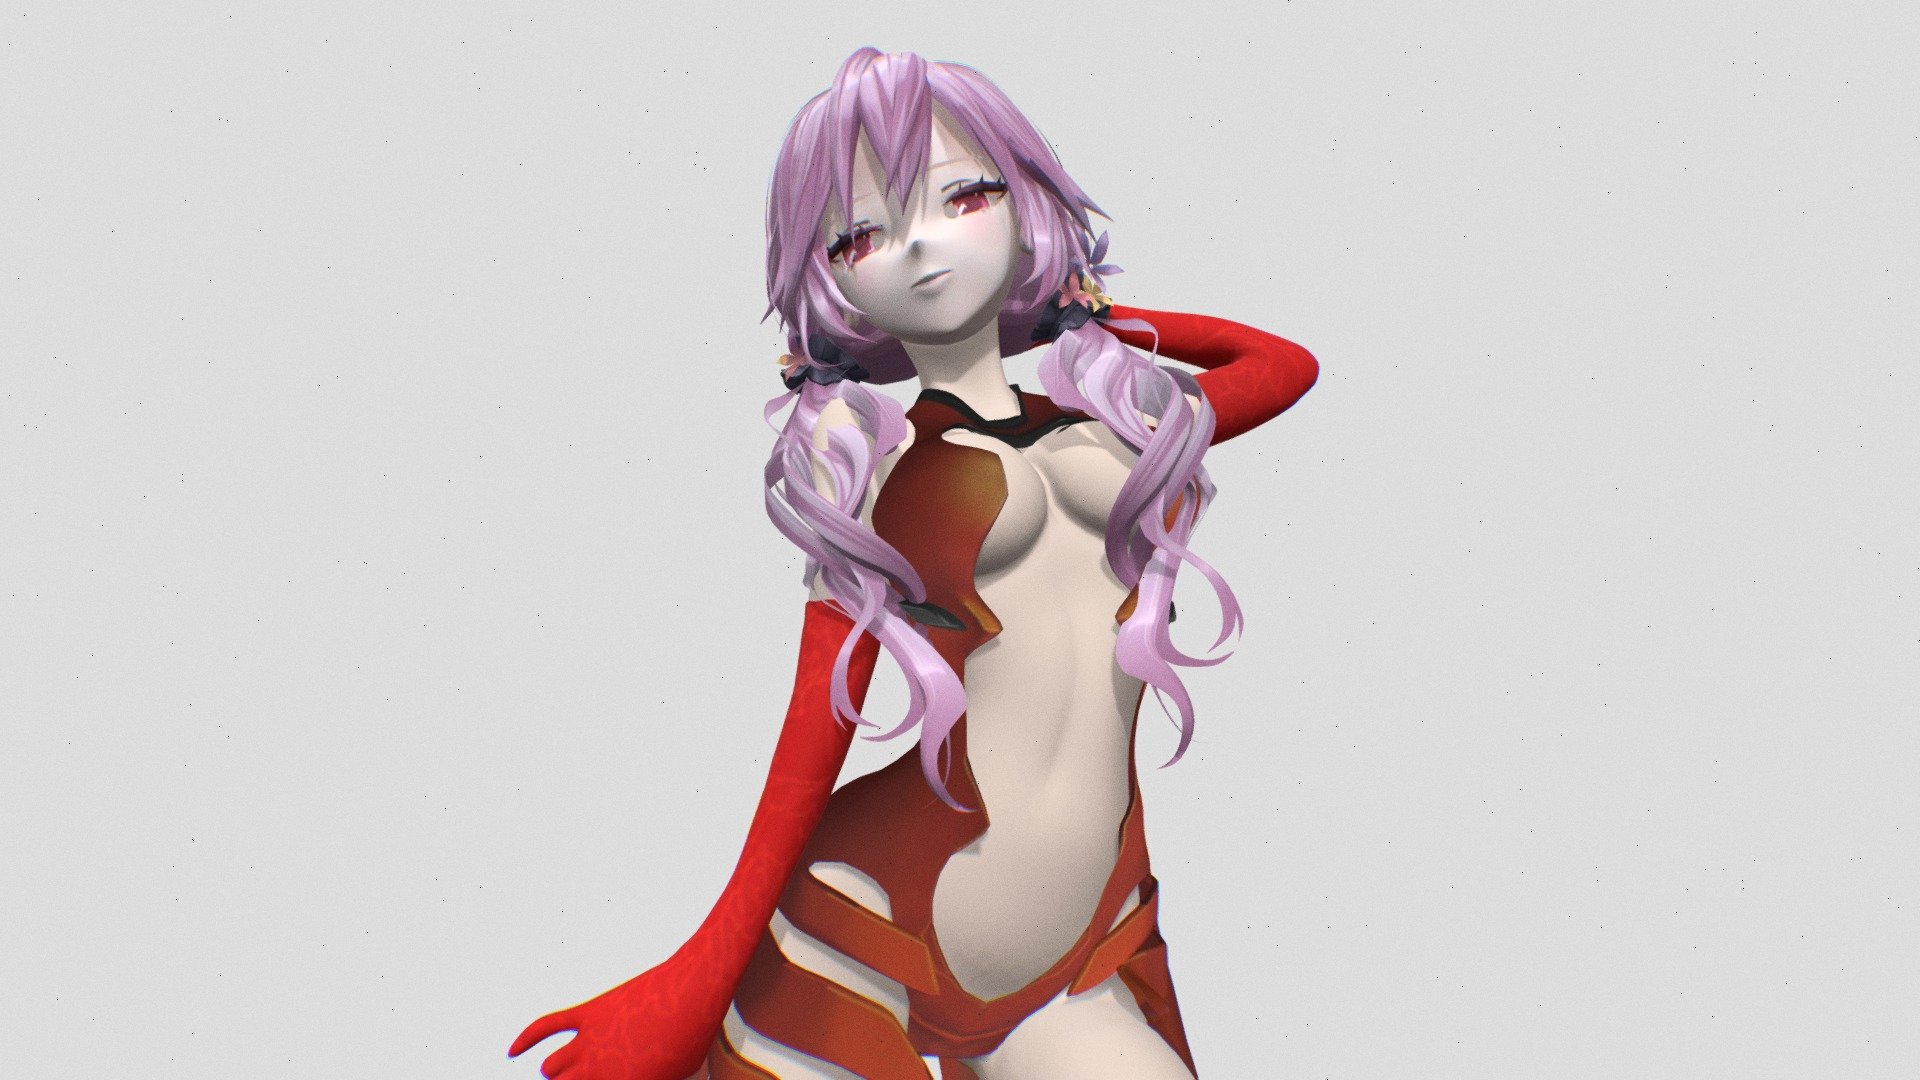 Yuzuriha Inori was the female protagonist of Guilty Crown and a member of the resistance guerrilla group called &ldquo;Funeral Parlor